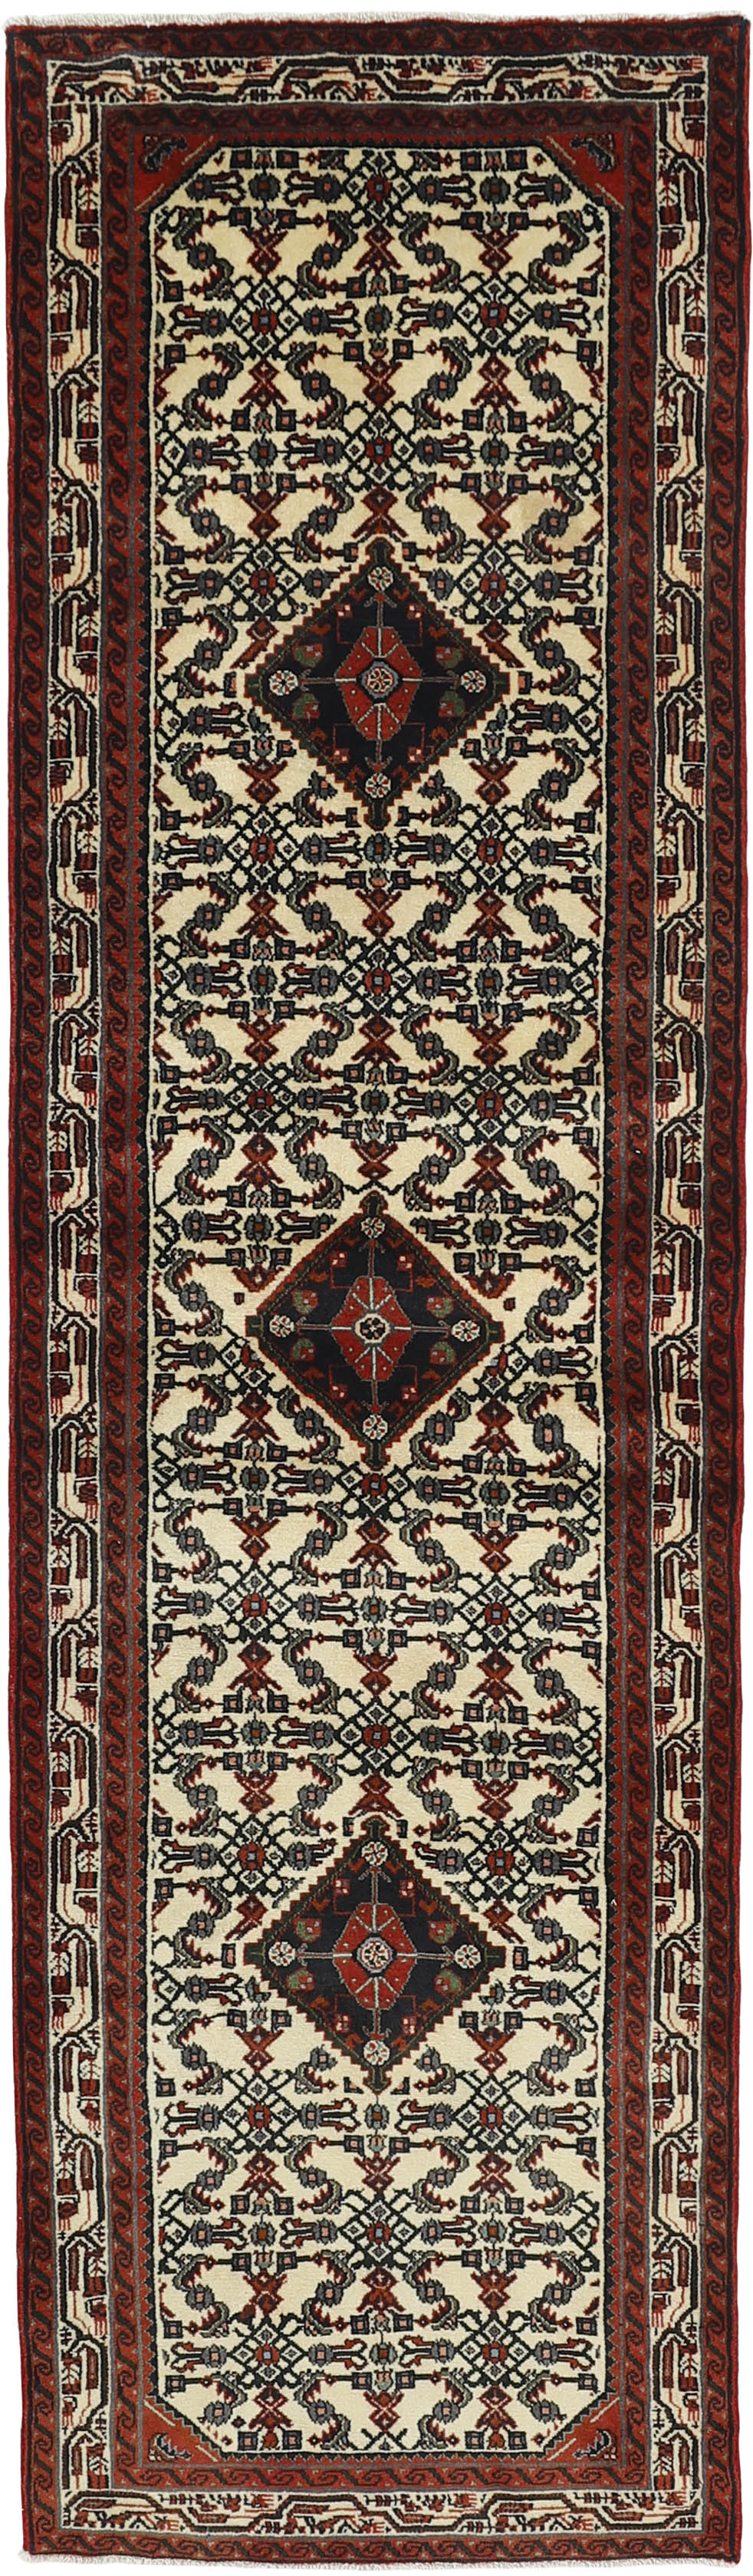 Authentic Persian runner with traditional floral pattern in red and black